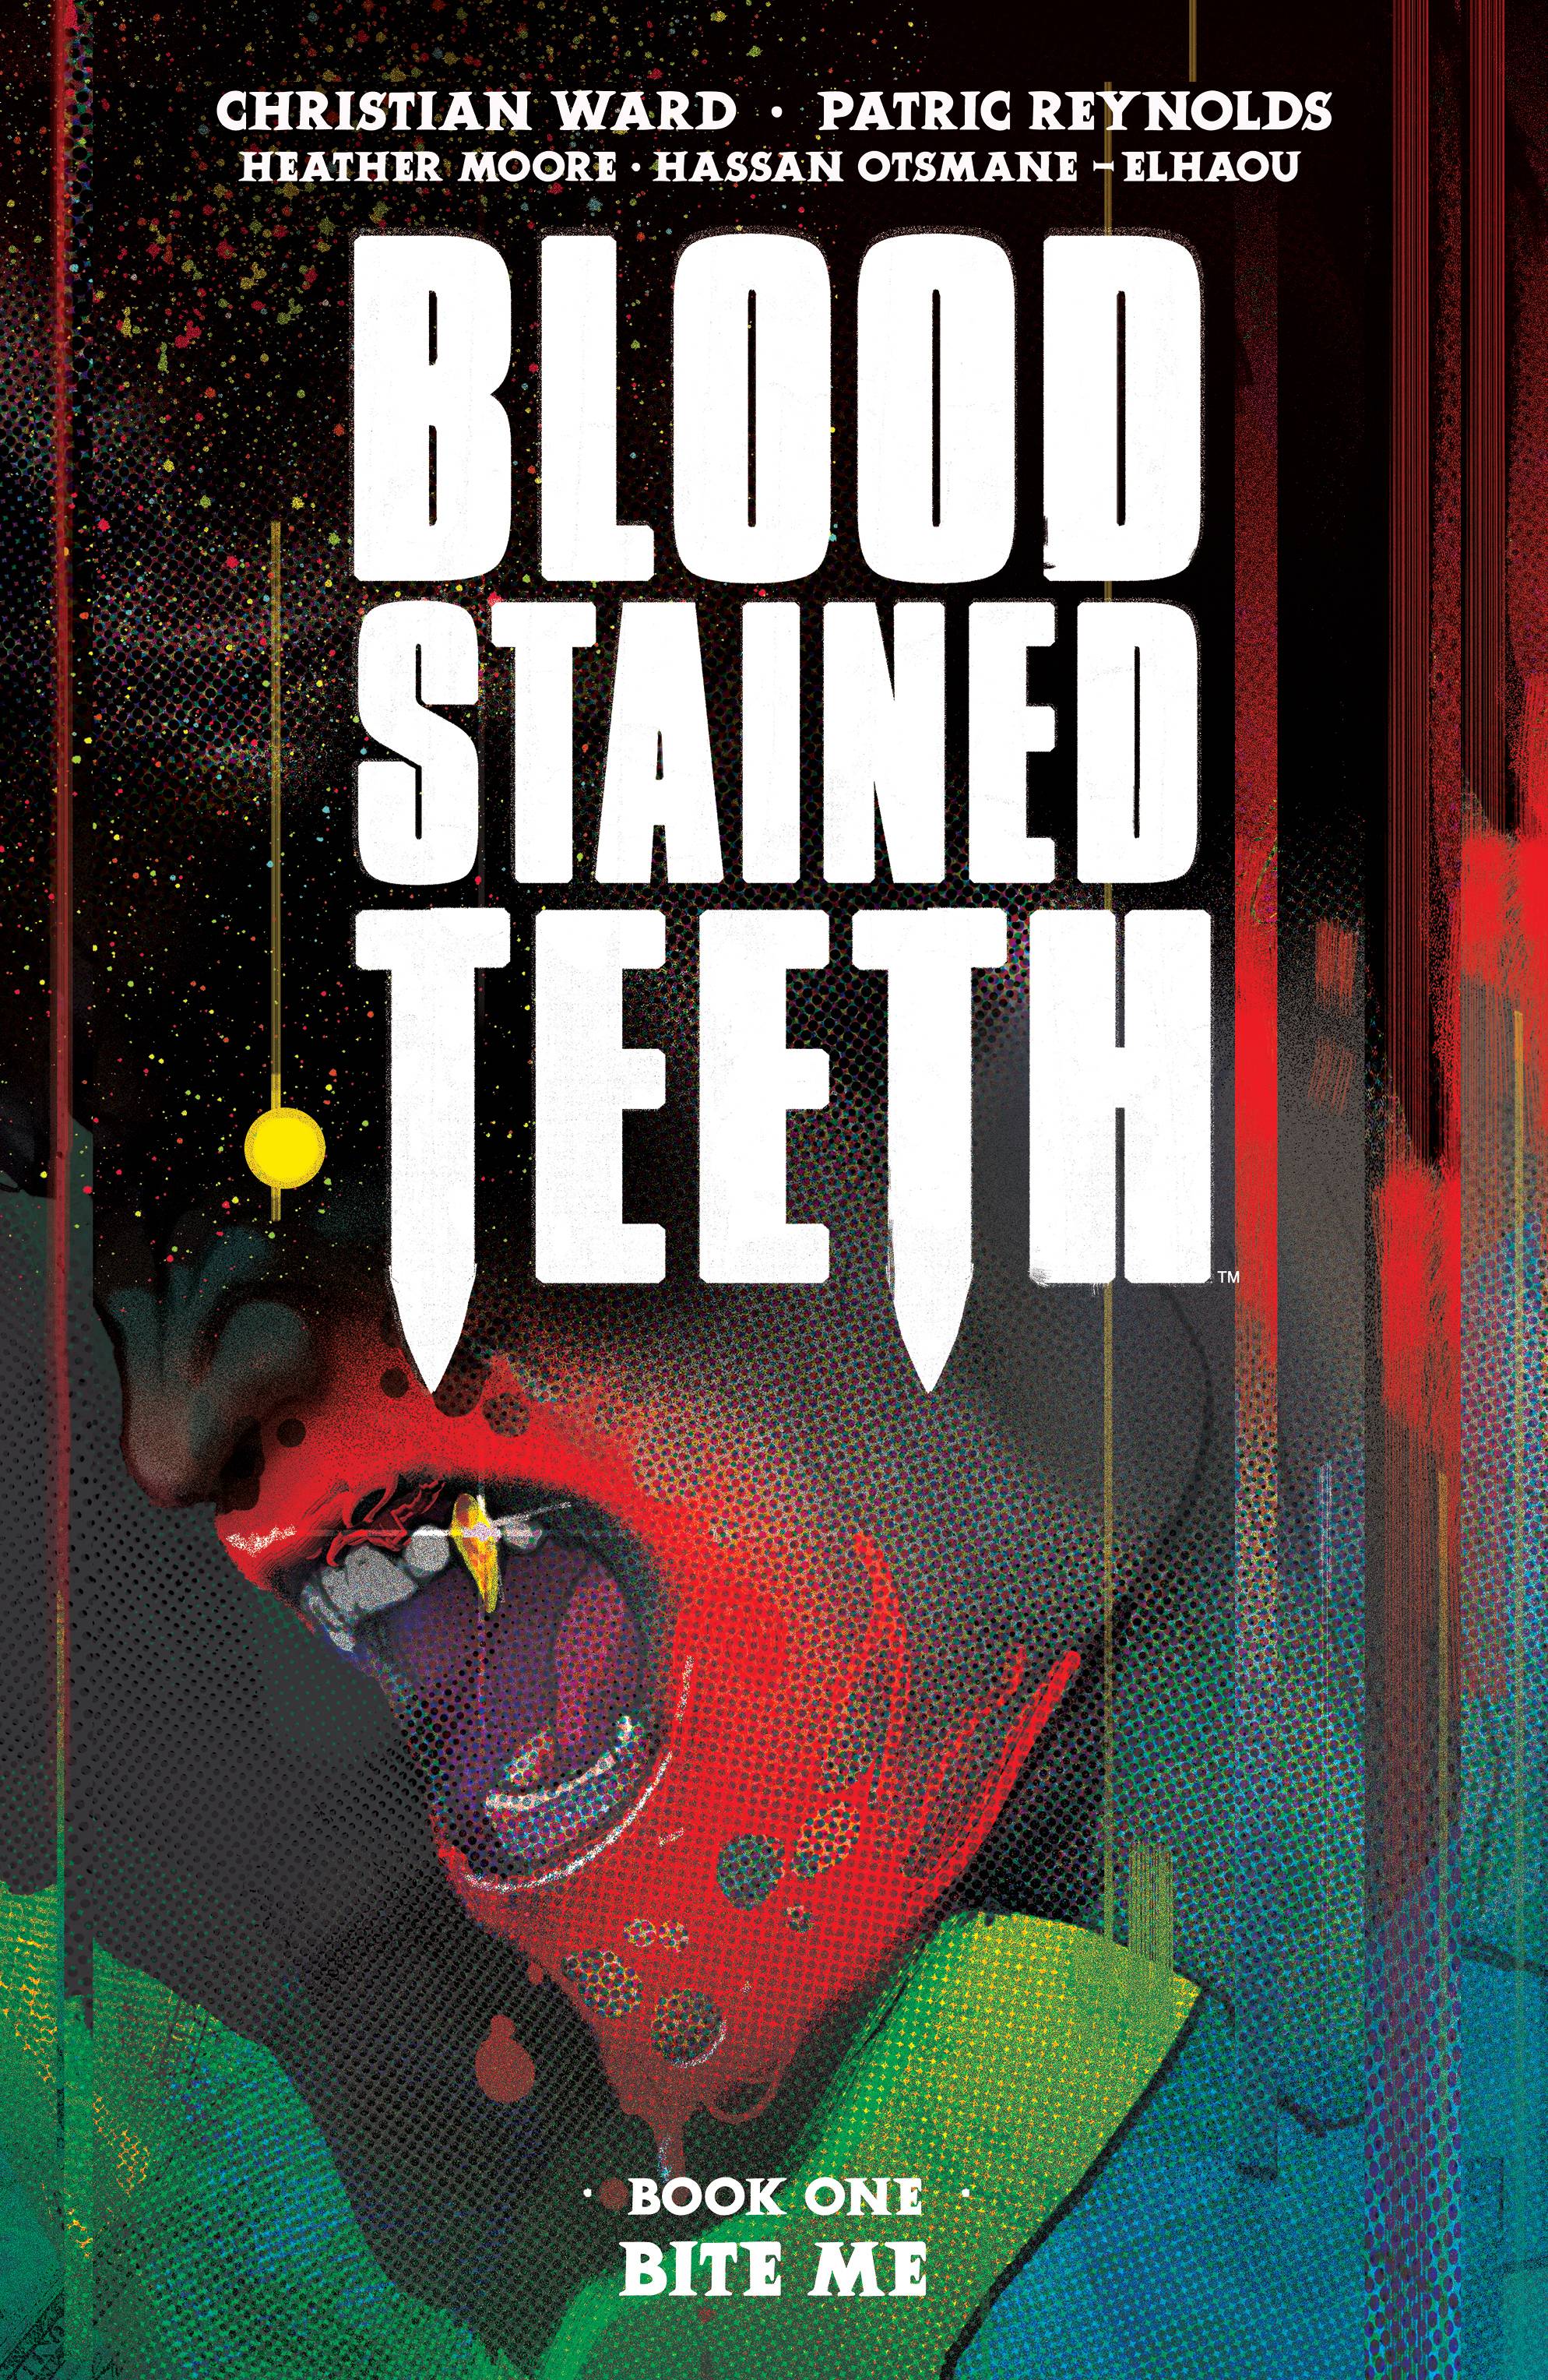 BLOOD STAINED TEETH TP VOL 01 BITE ME (MR)